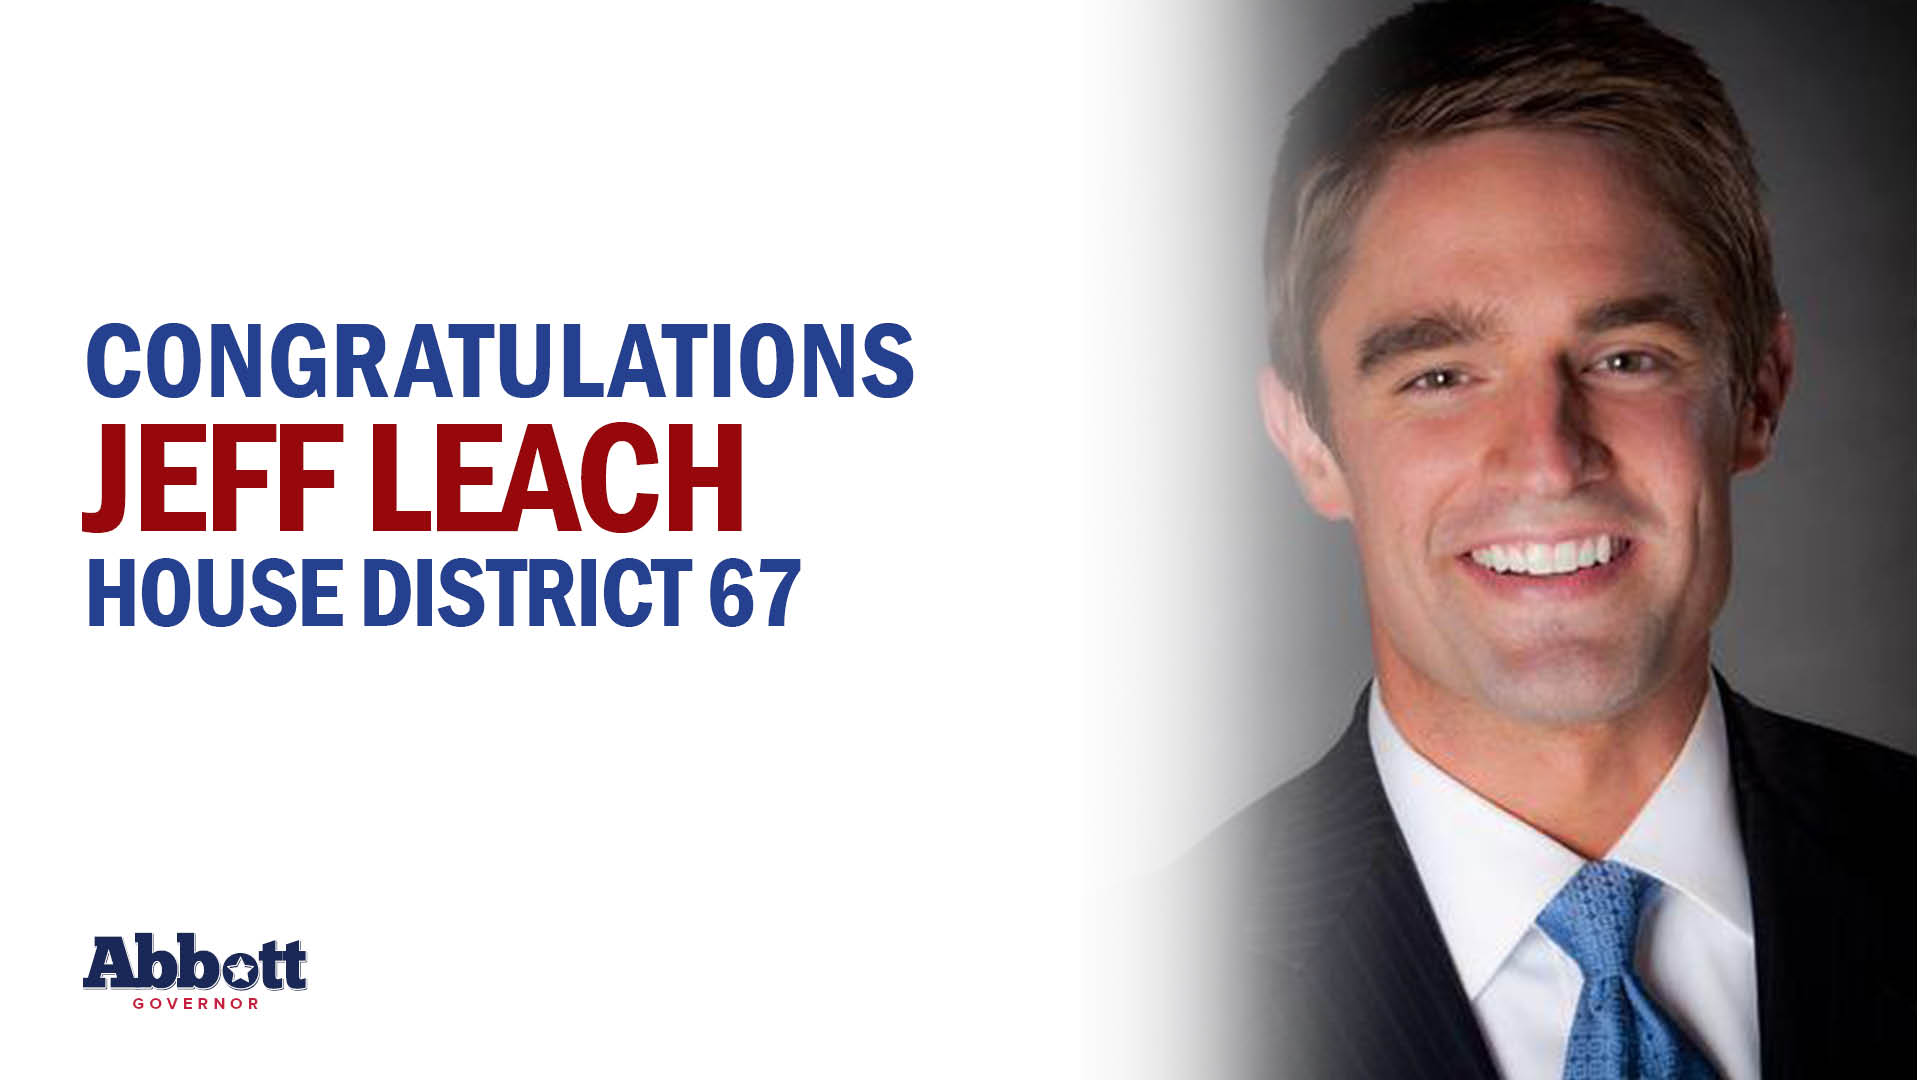 Governor Abbott Congratulates Jeff Leach On Hard-Earned Victory In House District 67